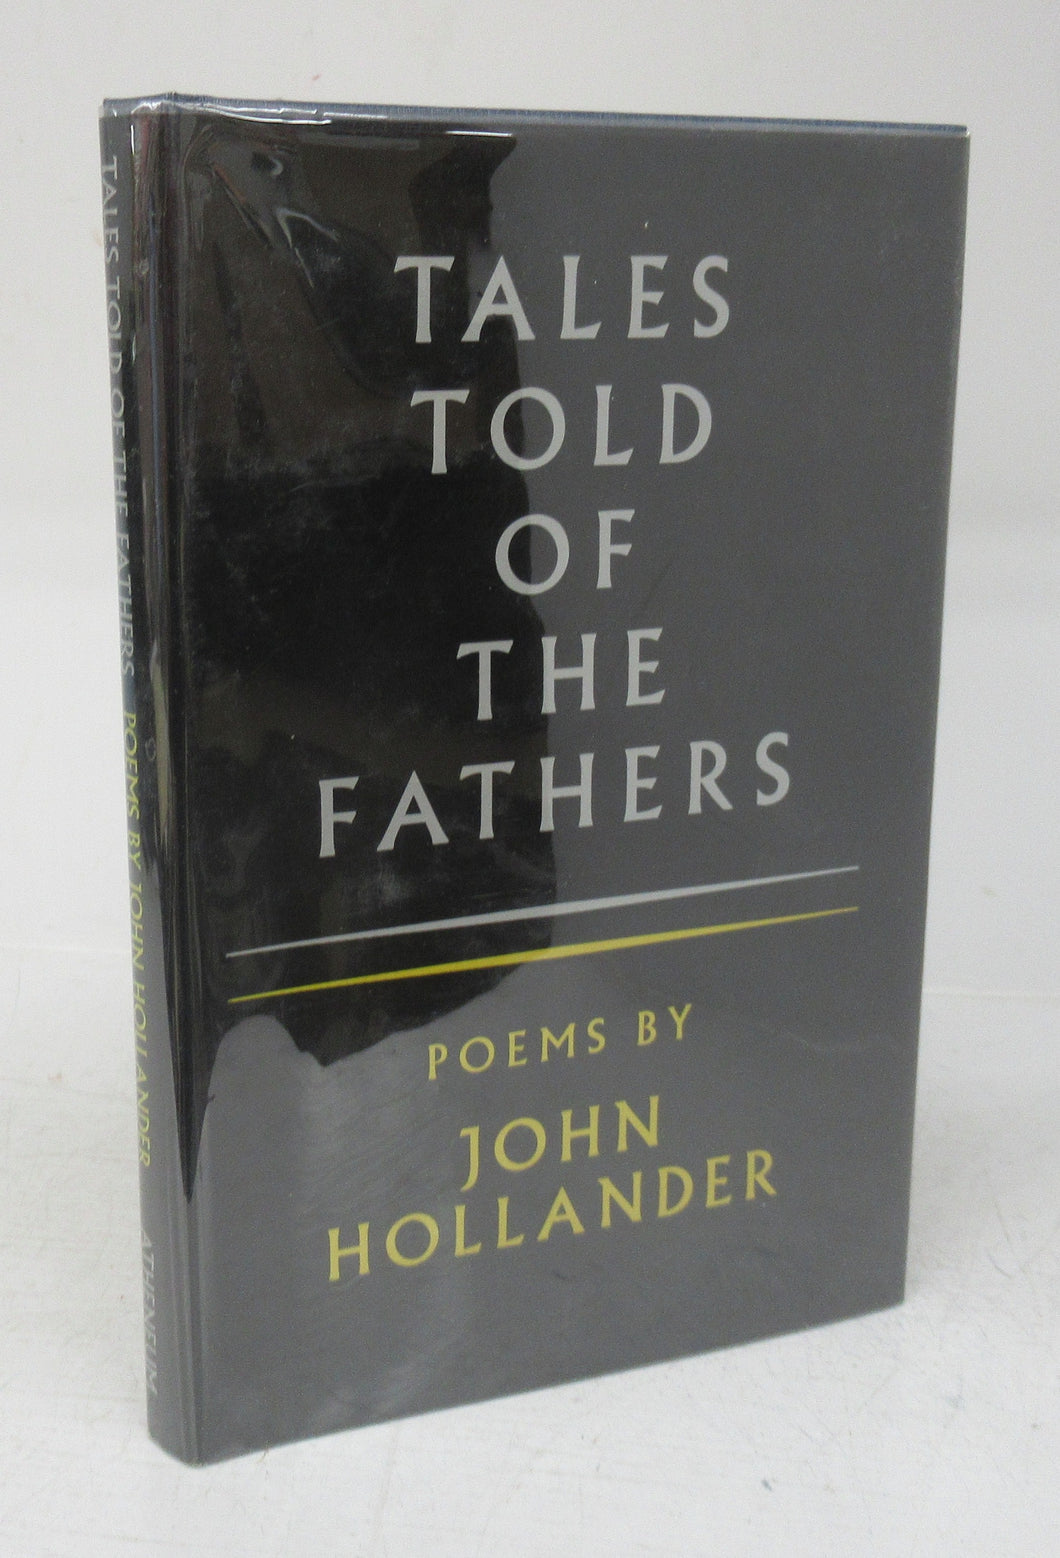 Tales Told of the Fathers